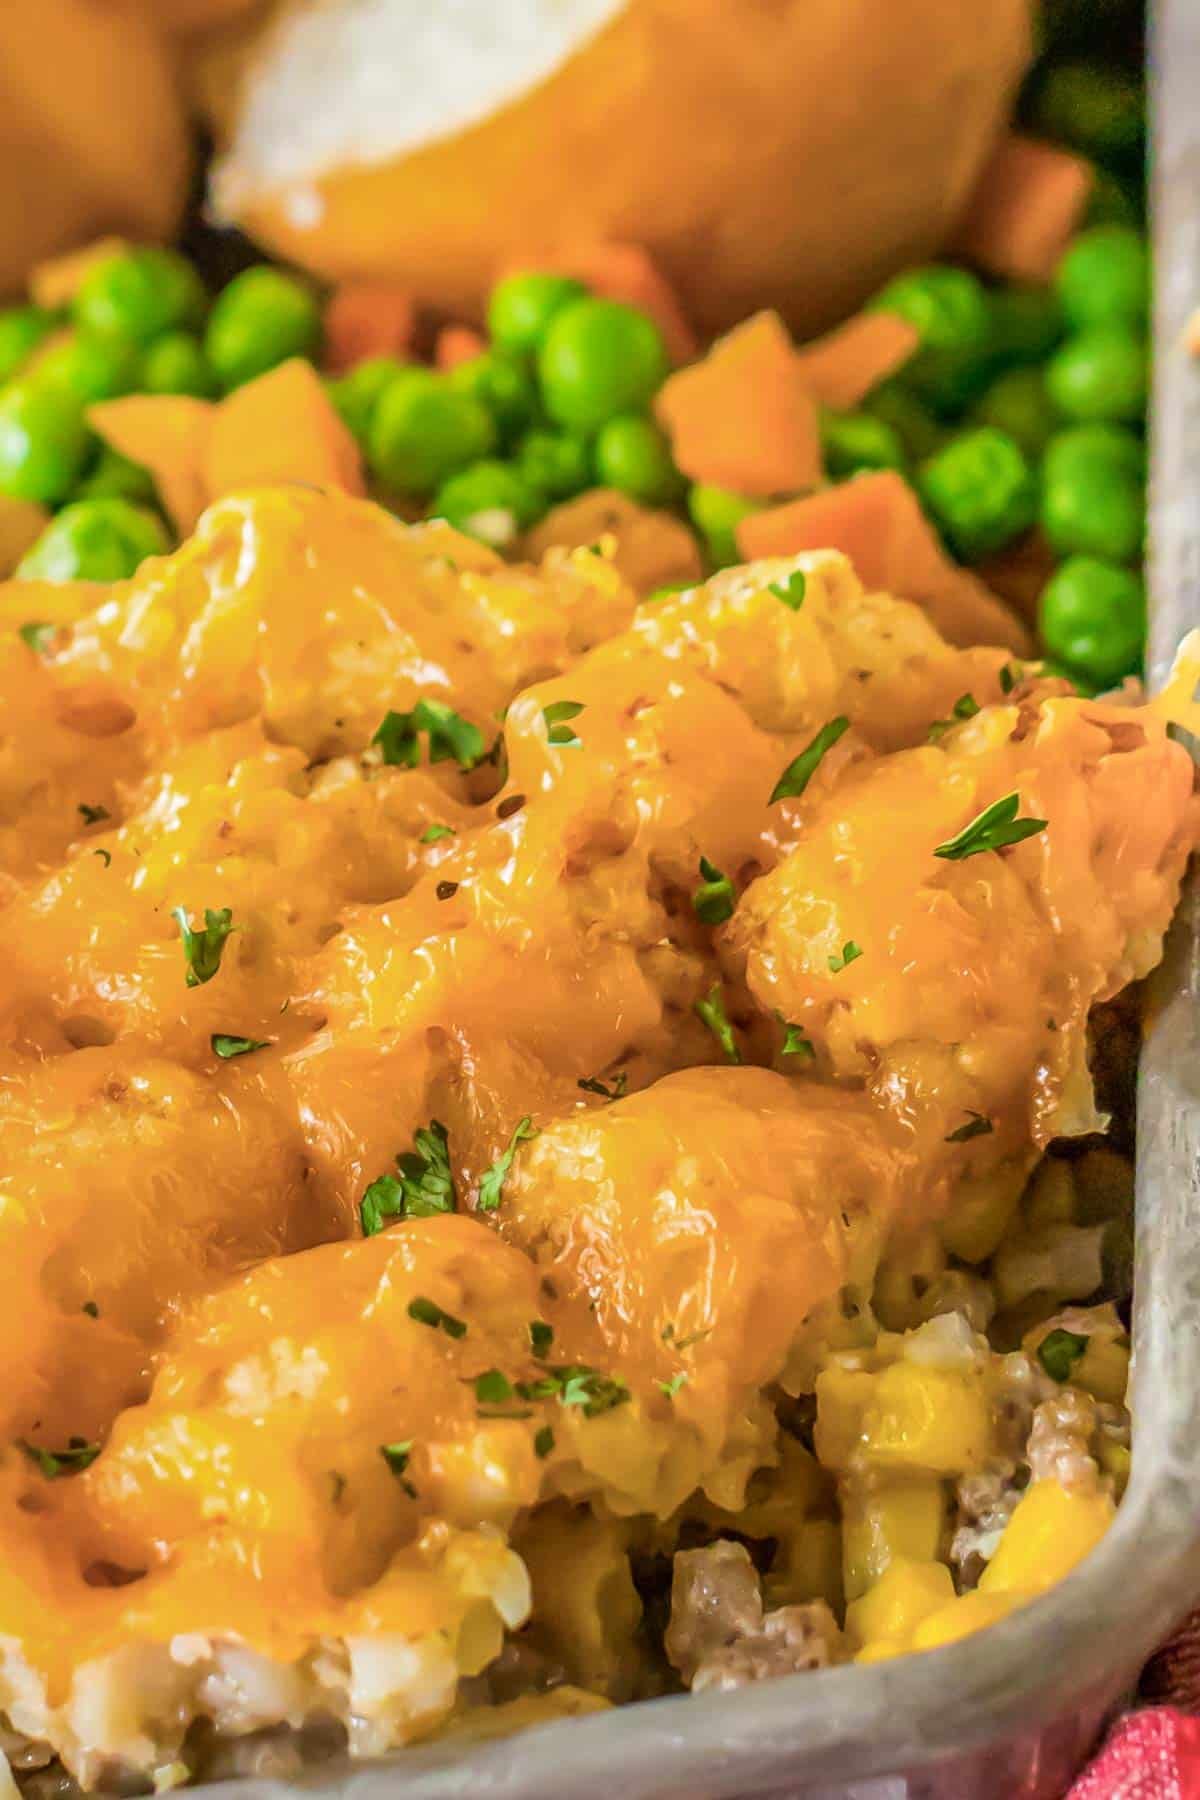 Cheesy tater tot casserole in a baking dish with peas and carrots.